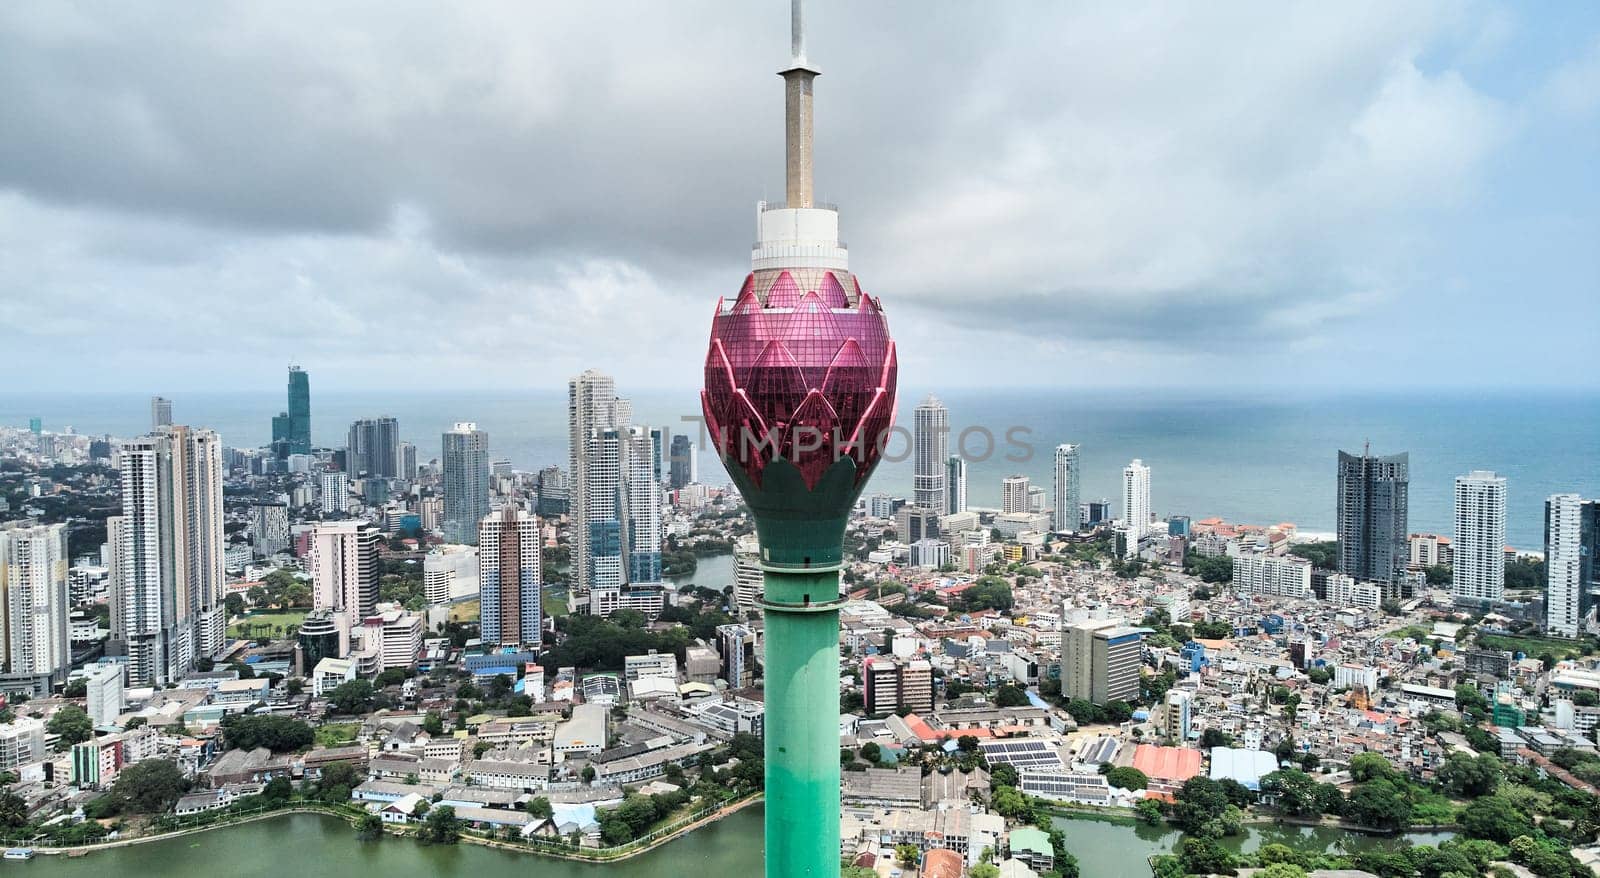 Aerial view of the main attraction, the Lotus Tower in the capital of Sri Lanka, Colombo by driver-s